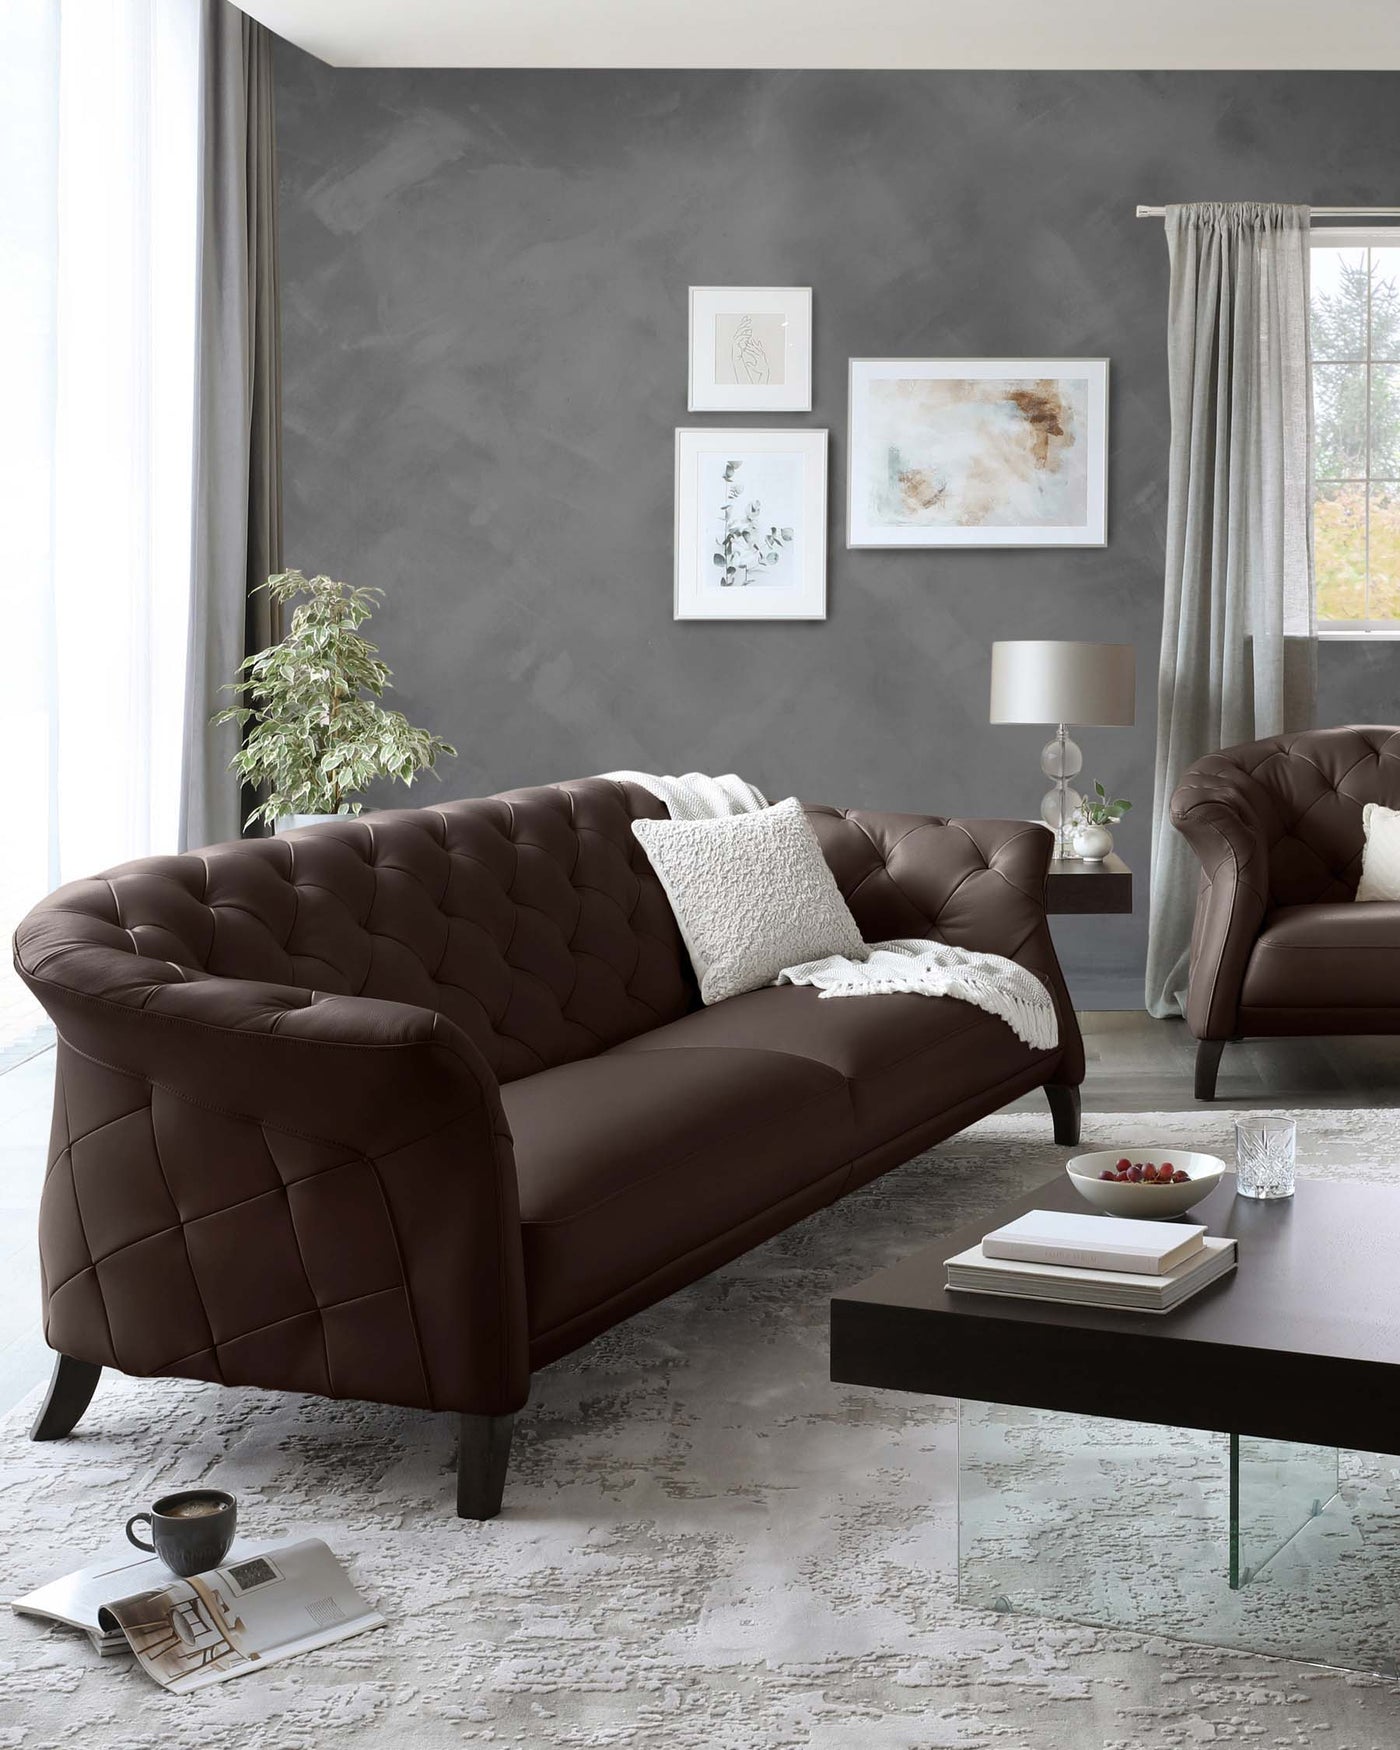 Elegant brown leather Chesterfield sofa with tufted upholstery and dark wooden legs, accompanied by a matching armchair in the background. In front of the sofa, a minimalist rectangular coffee table with a glass top and black base, resting on a textured off-white area rug.